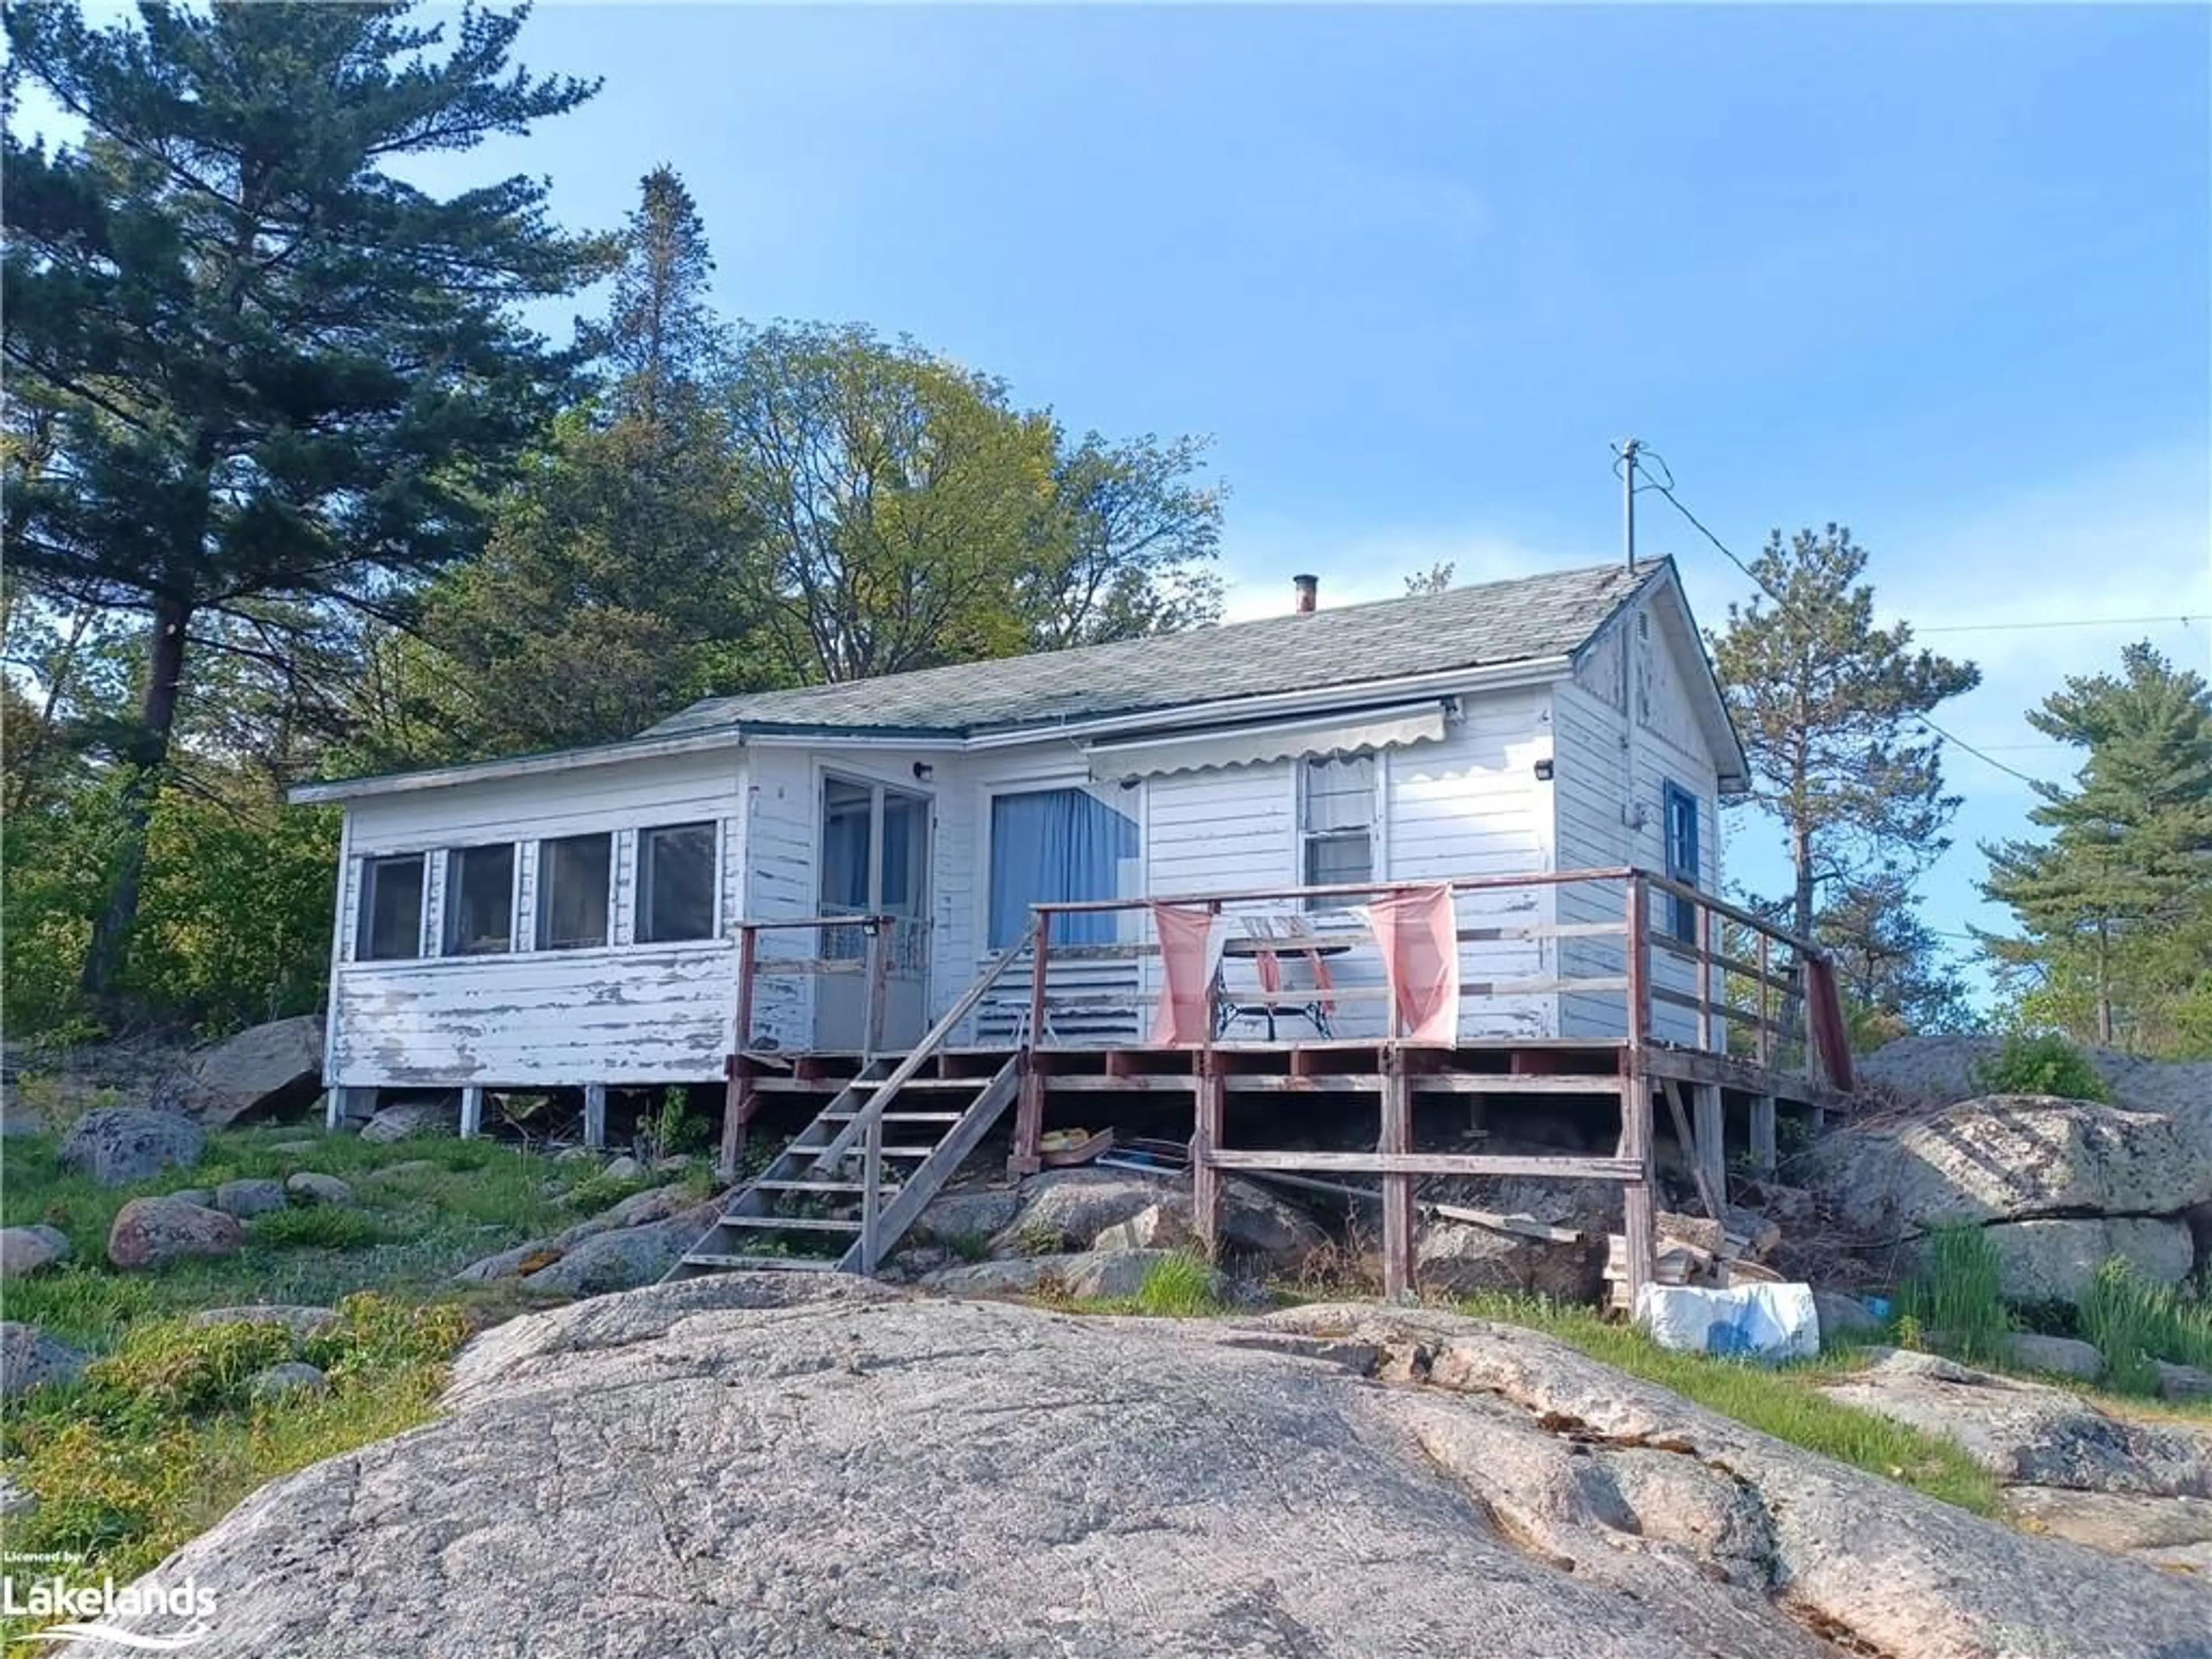 Cottage for AE545 Key River, Killarney Ontario P0G 1A0